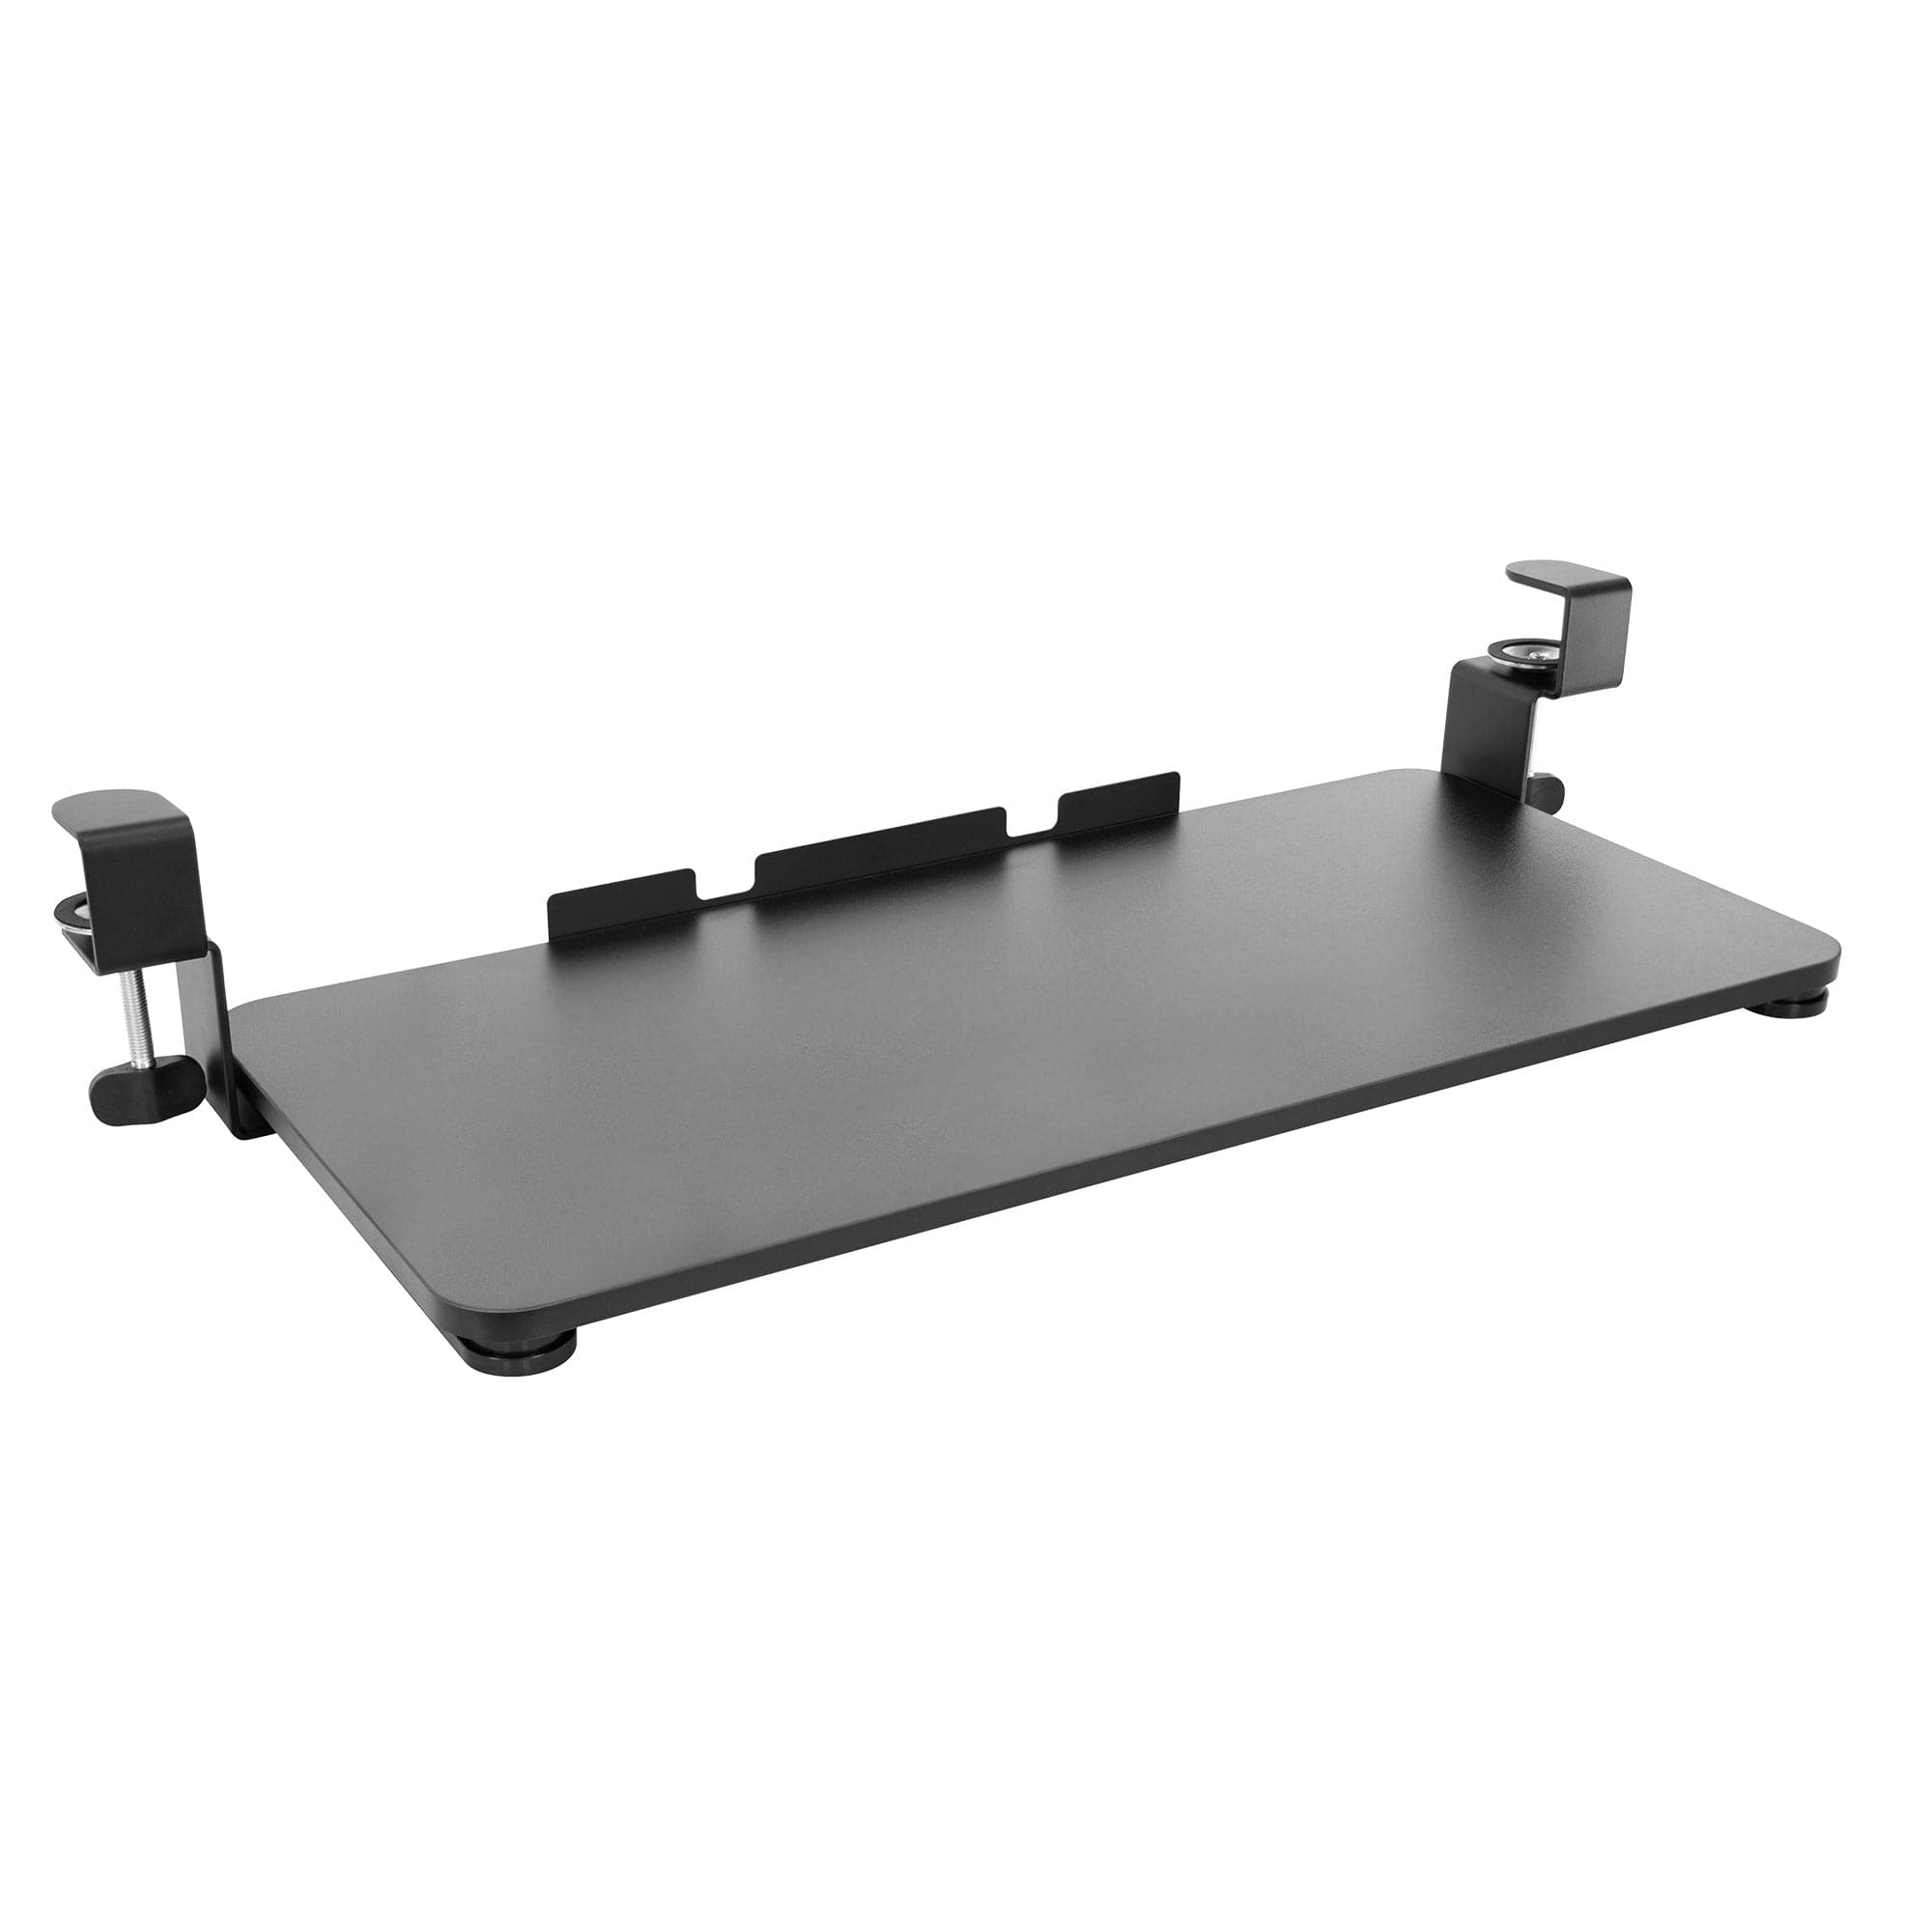 Clamp-On Adjustable Keyboard and Mouse Tray